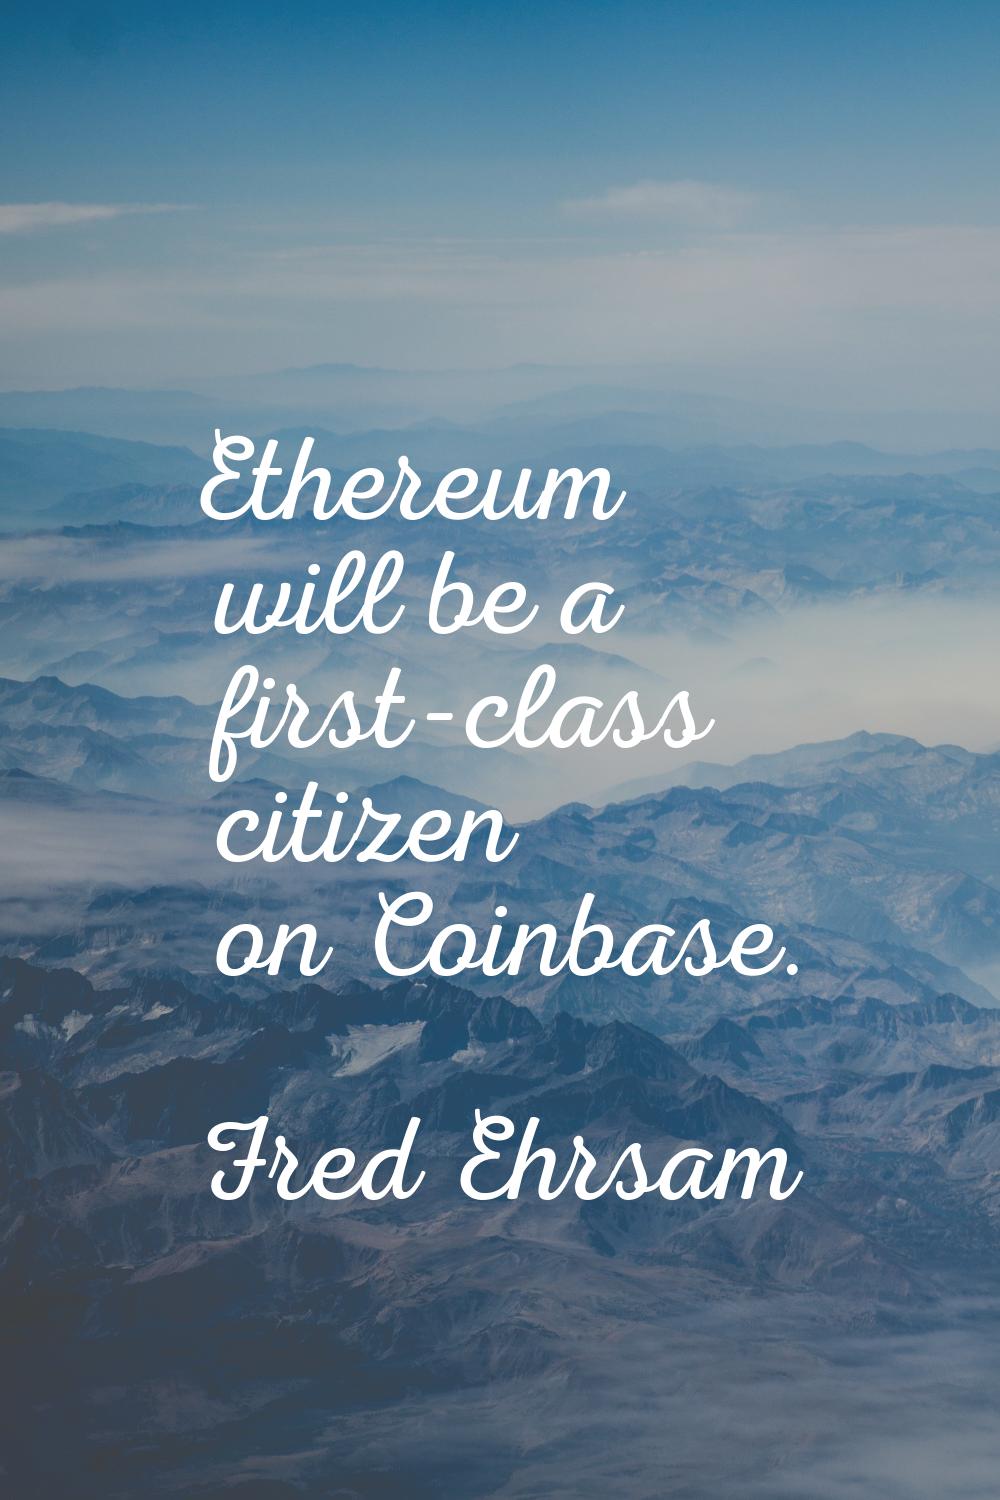 Ethereum will be a first-class citizen on Coinbase.